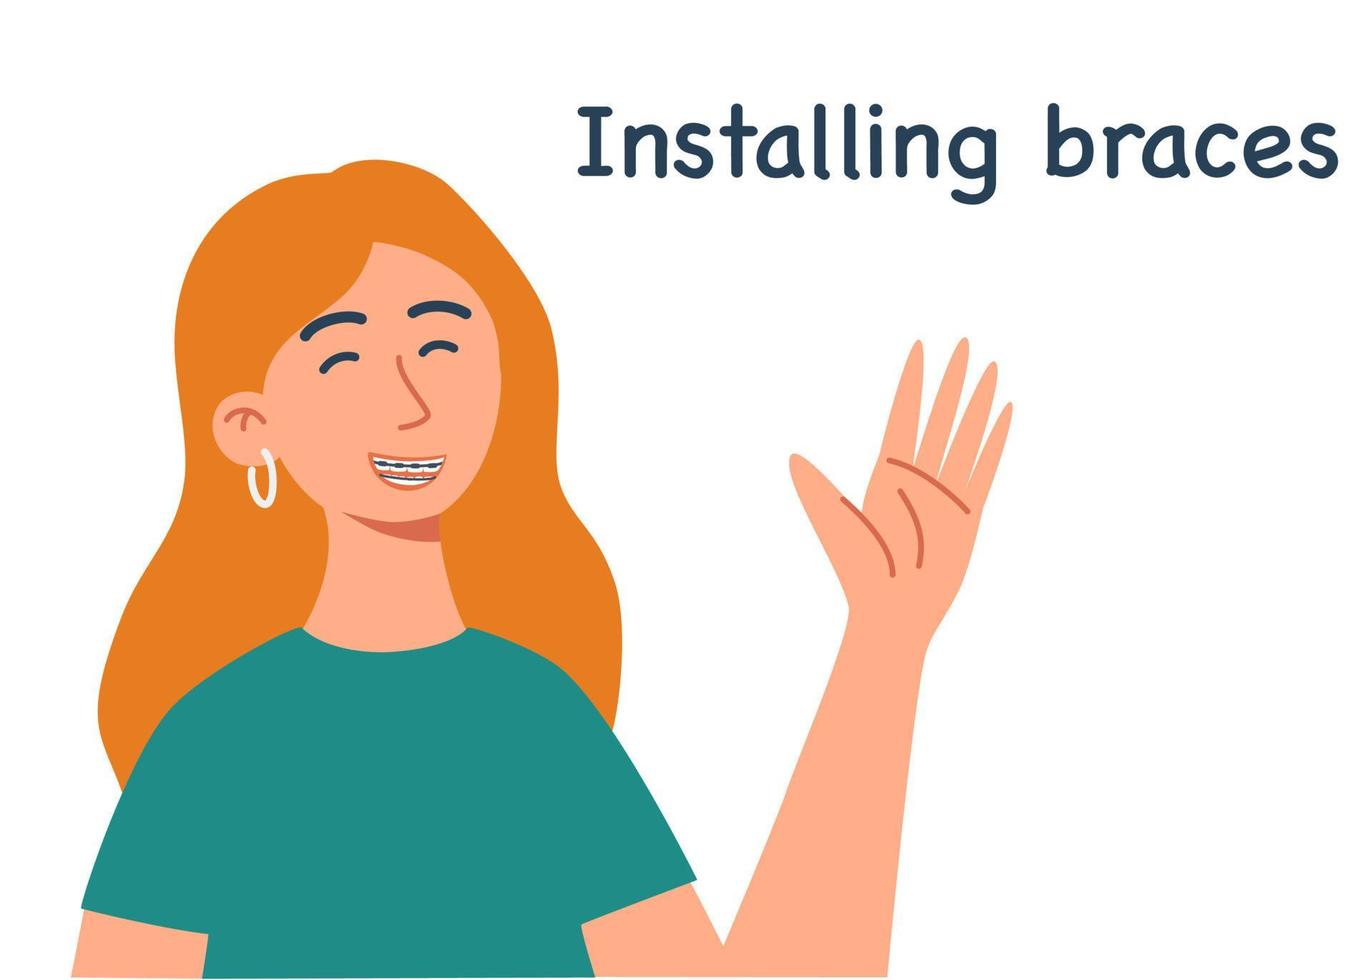 Smiling girl with braces on teeth. Installing braces. Correction of byte. Dentistry. Orthodontics. Installing braces. Metal braces. Straight teeth. Vector illustration in flat style.